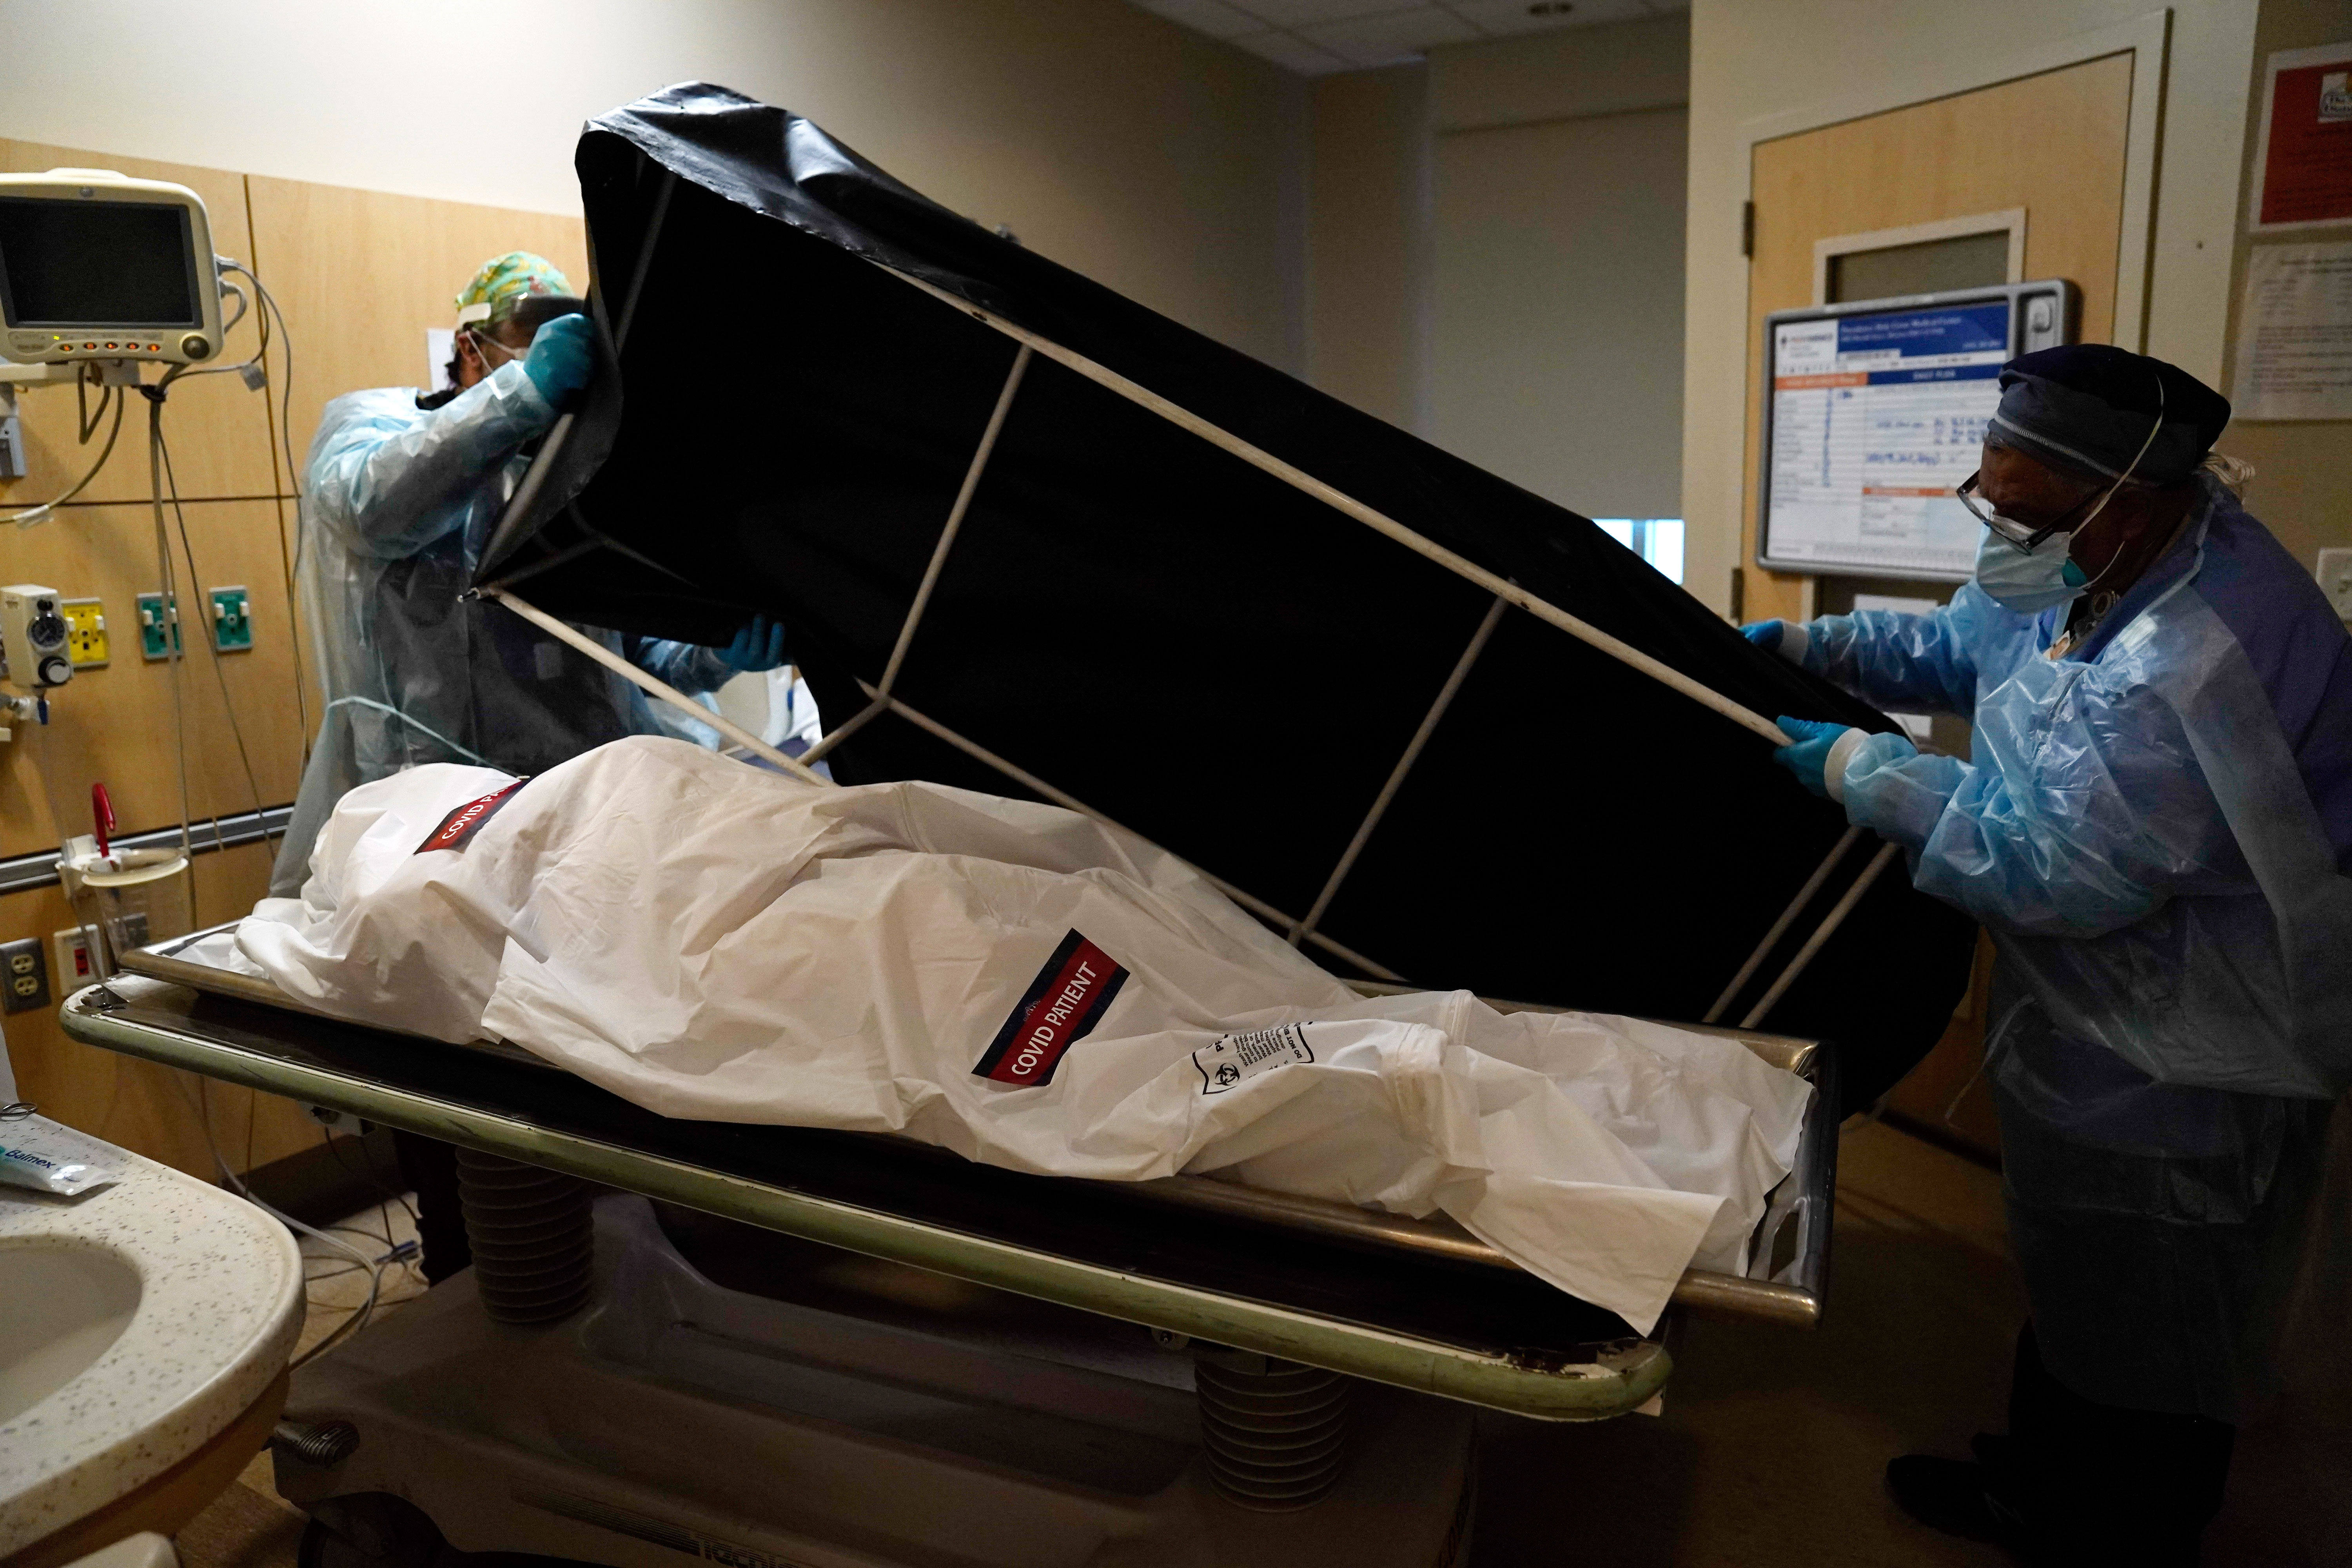 Transporters Miguel Lopez, right, and Noe Meza prepare to move the body of someone who died from Covid-19 to a morgue at Providence Holy Cross Medical Center in Los Angeles on January 9.